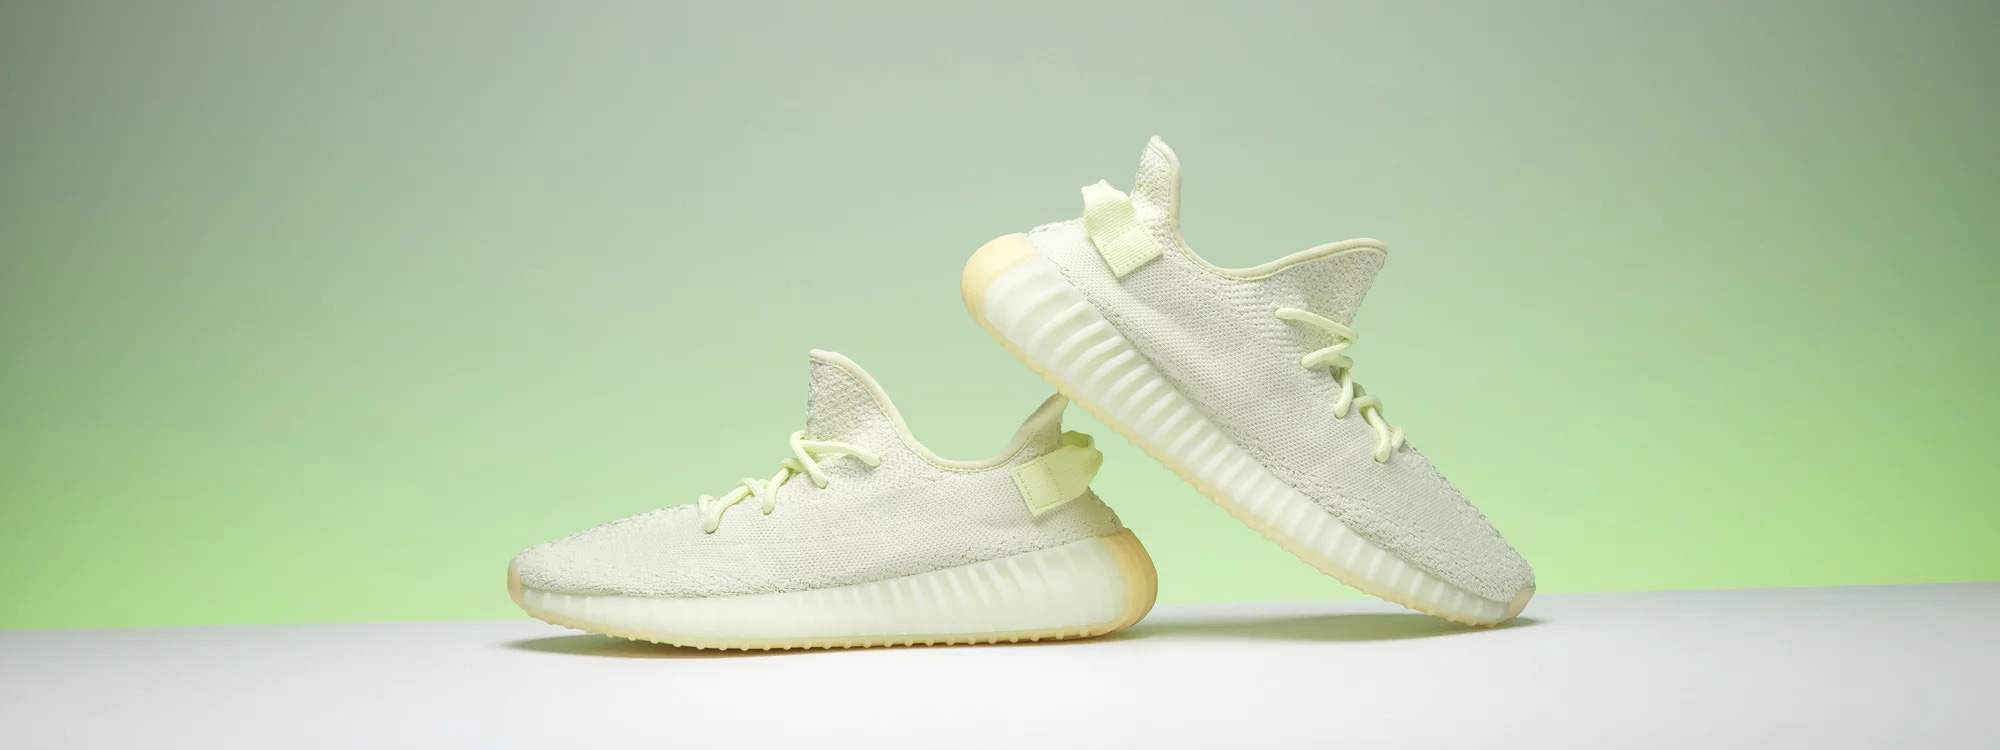 Buy New Adidas Yeezy Boost 350 V2 Butter